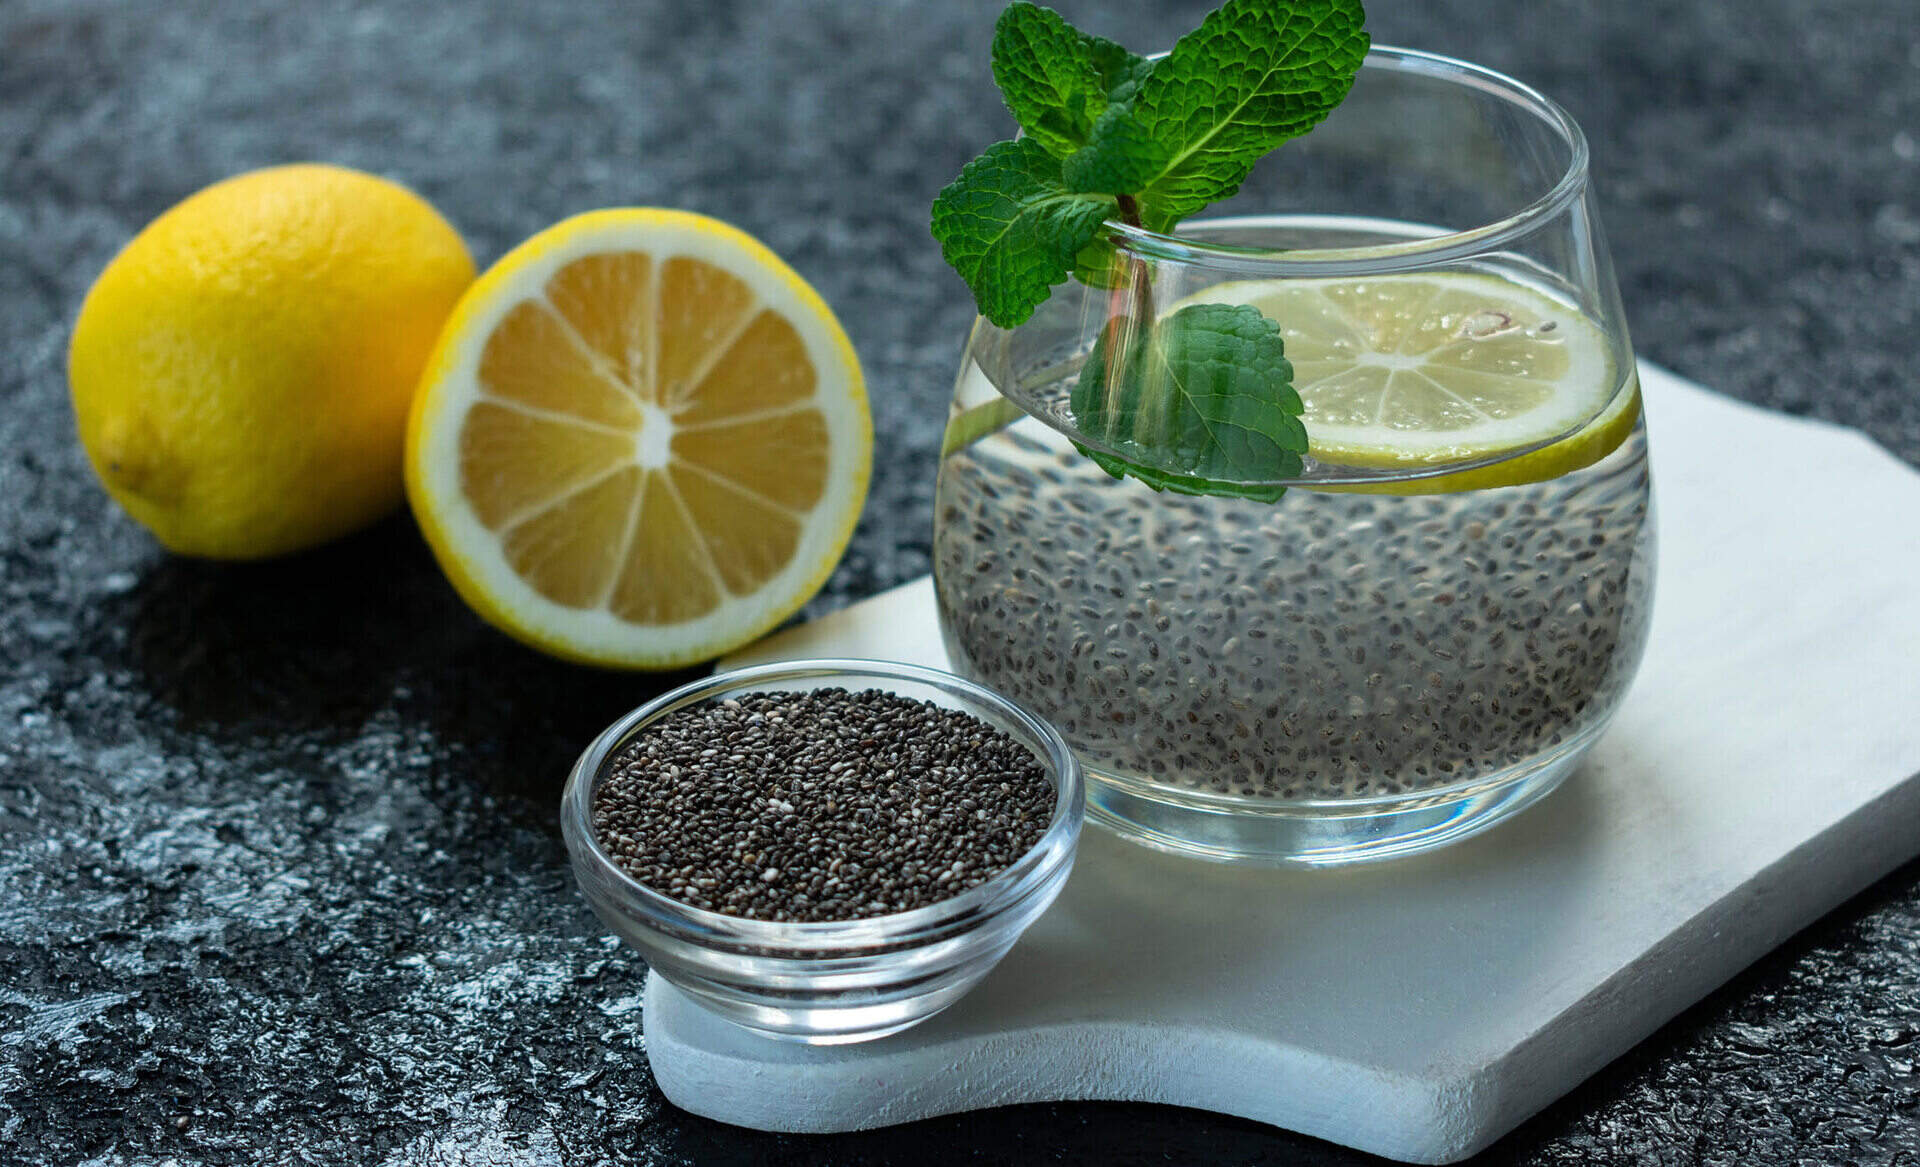 How To Make Chia Seed Drinks